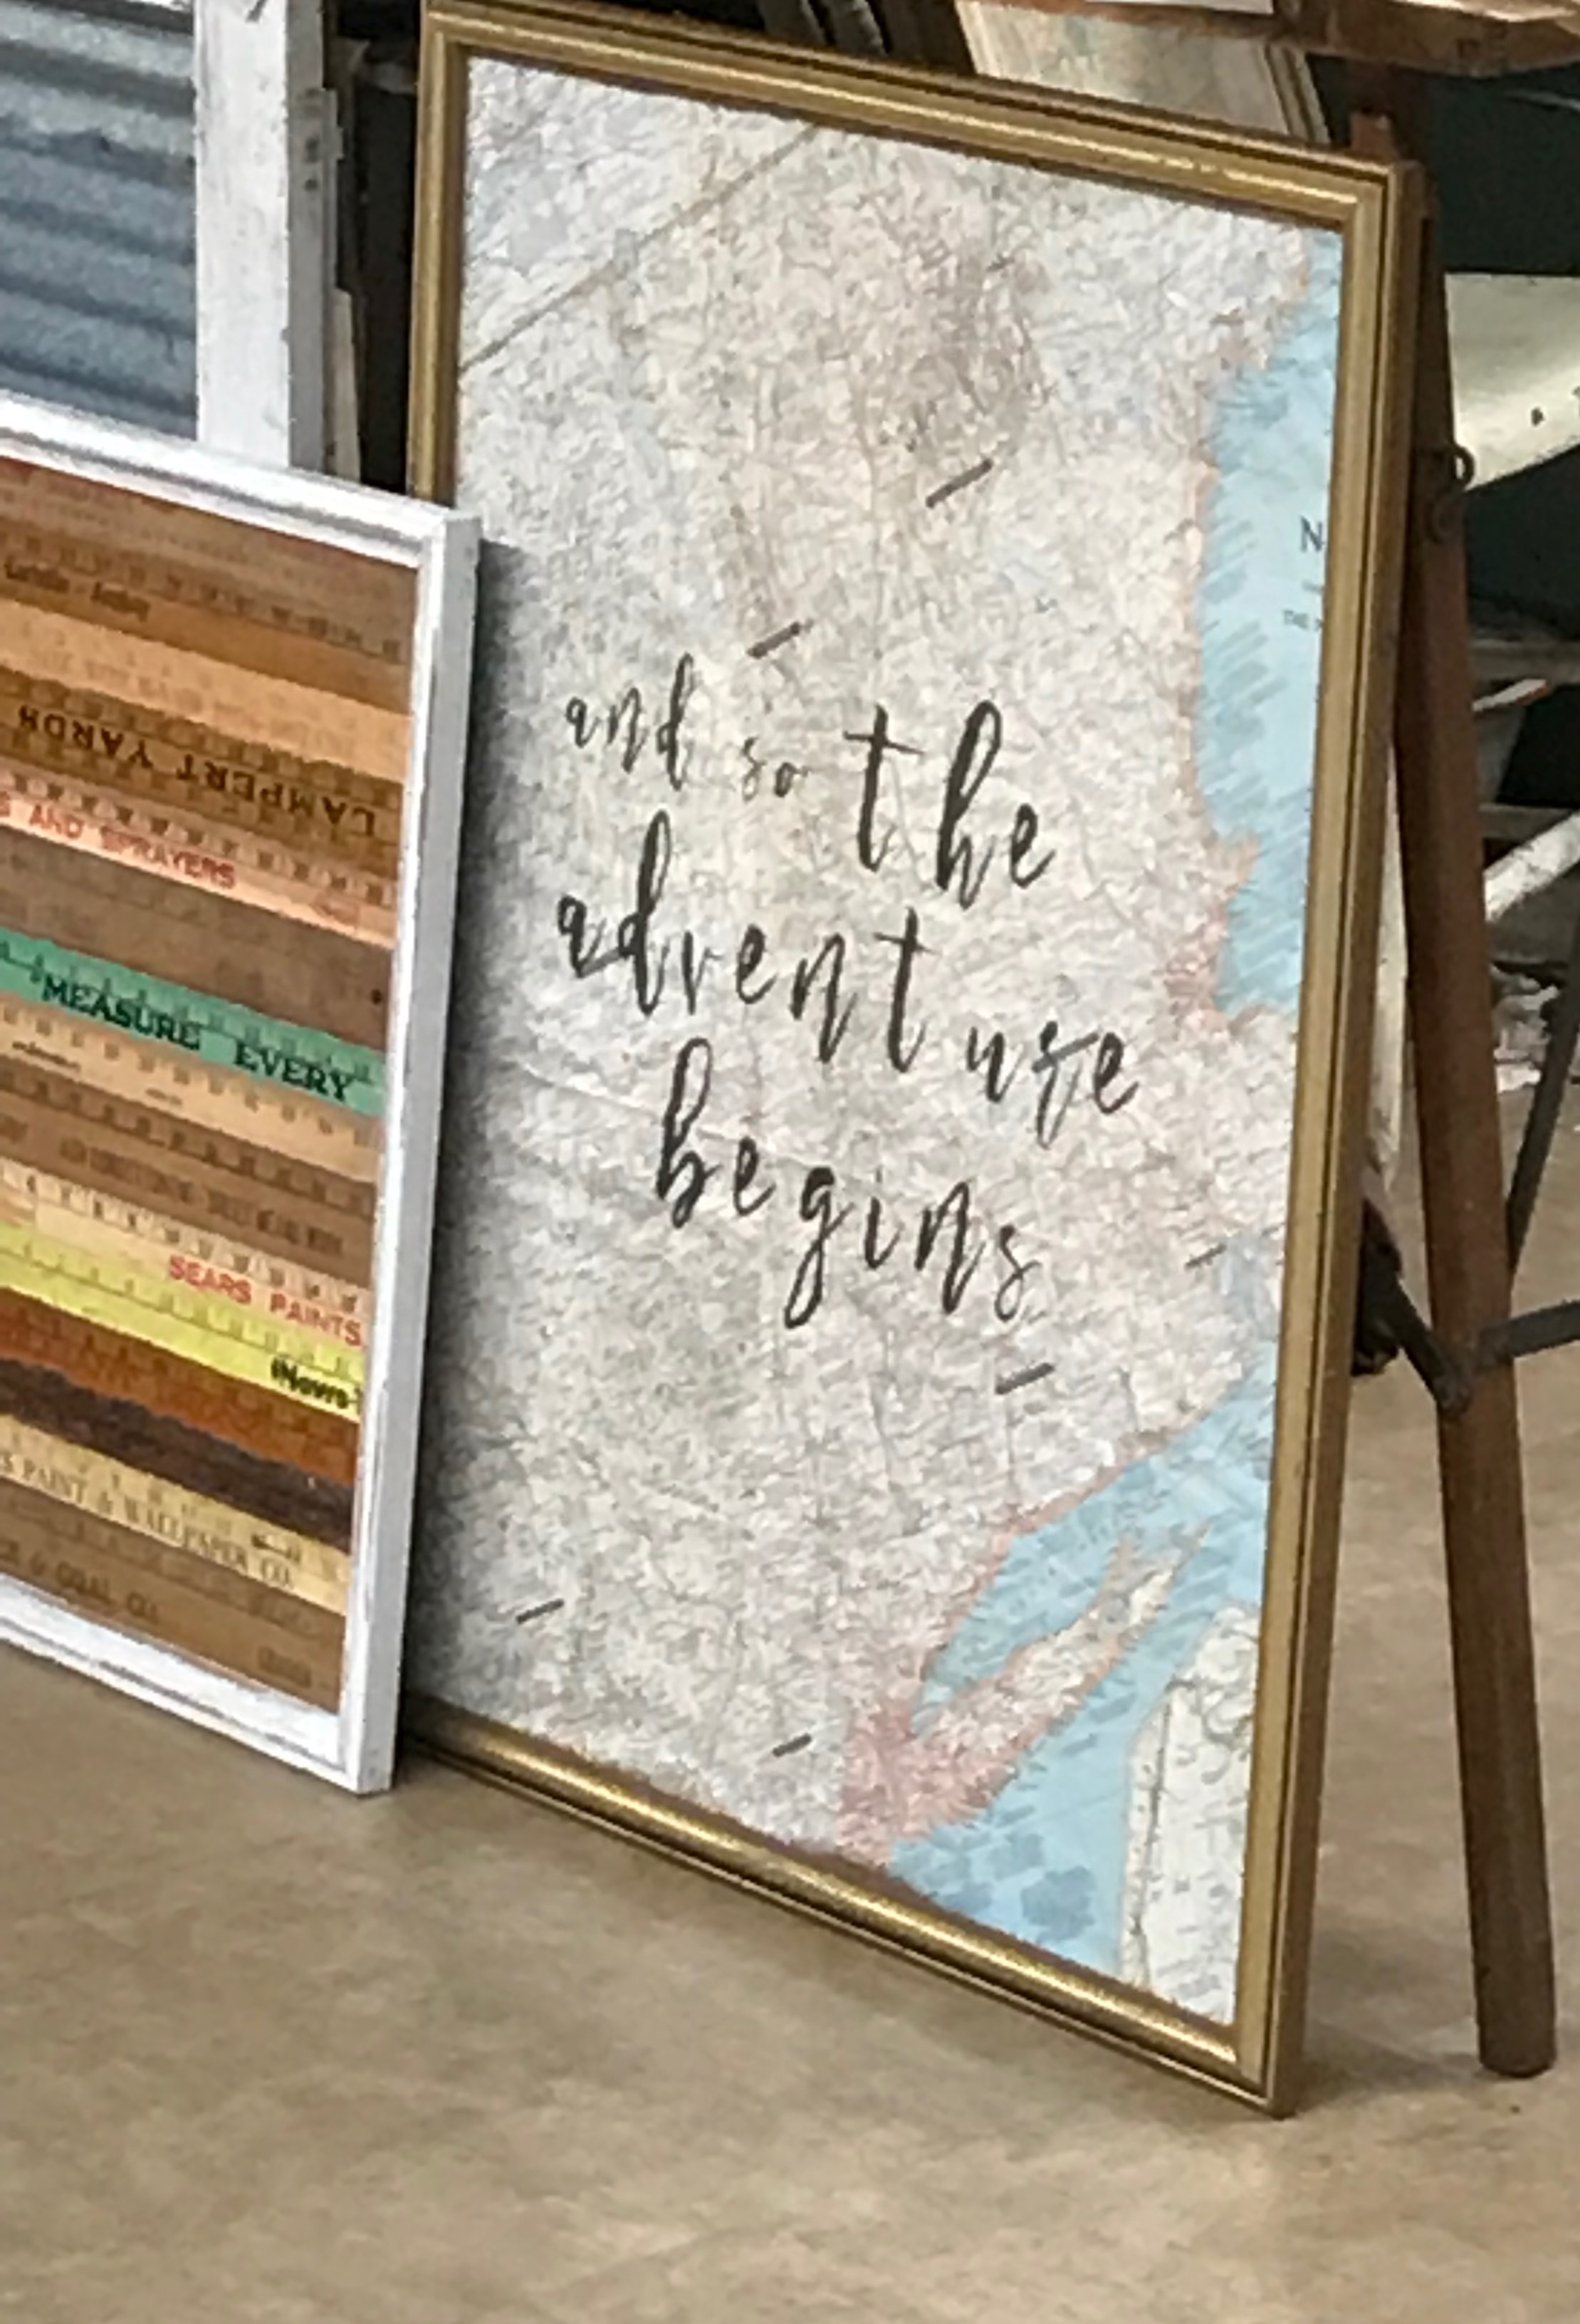 old rulers cut and framed
old maps with fun quotes